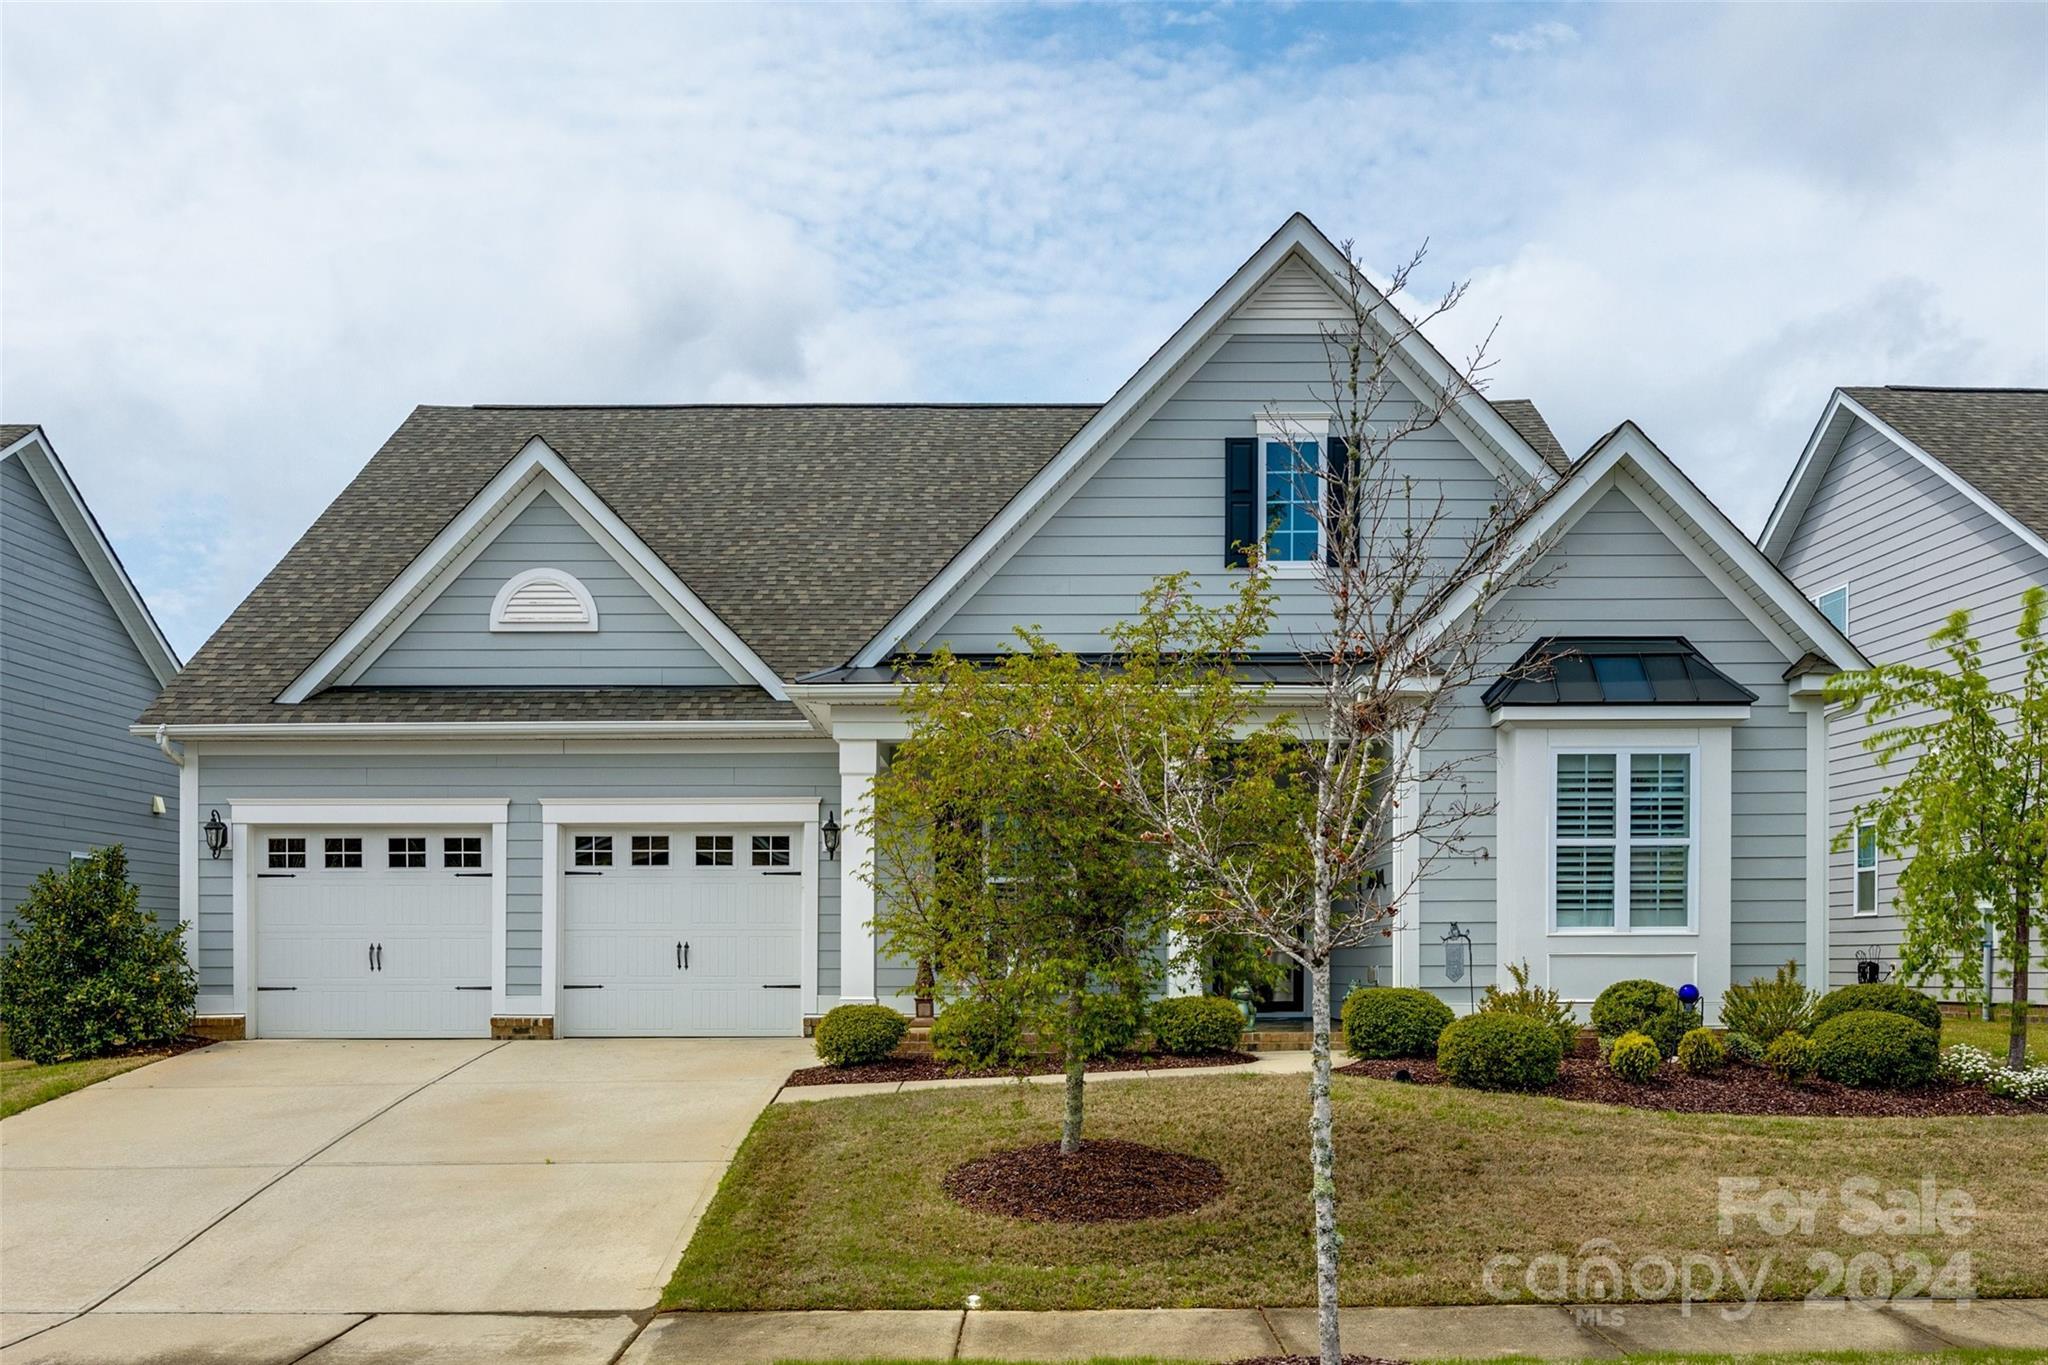 Photo one of 13154 Union Square Dr Huntersville NC 28078 | MLS 4127059